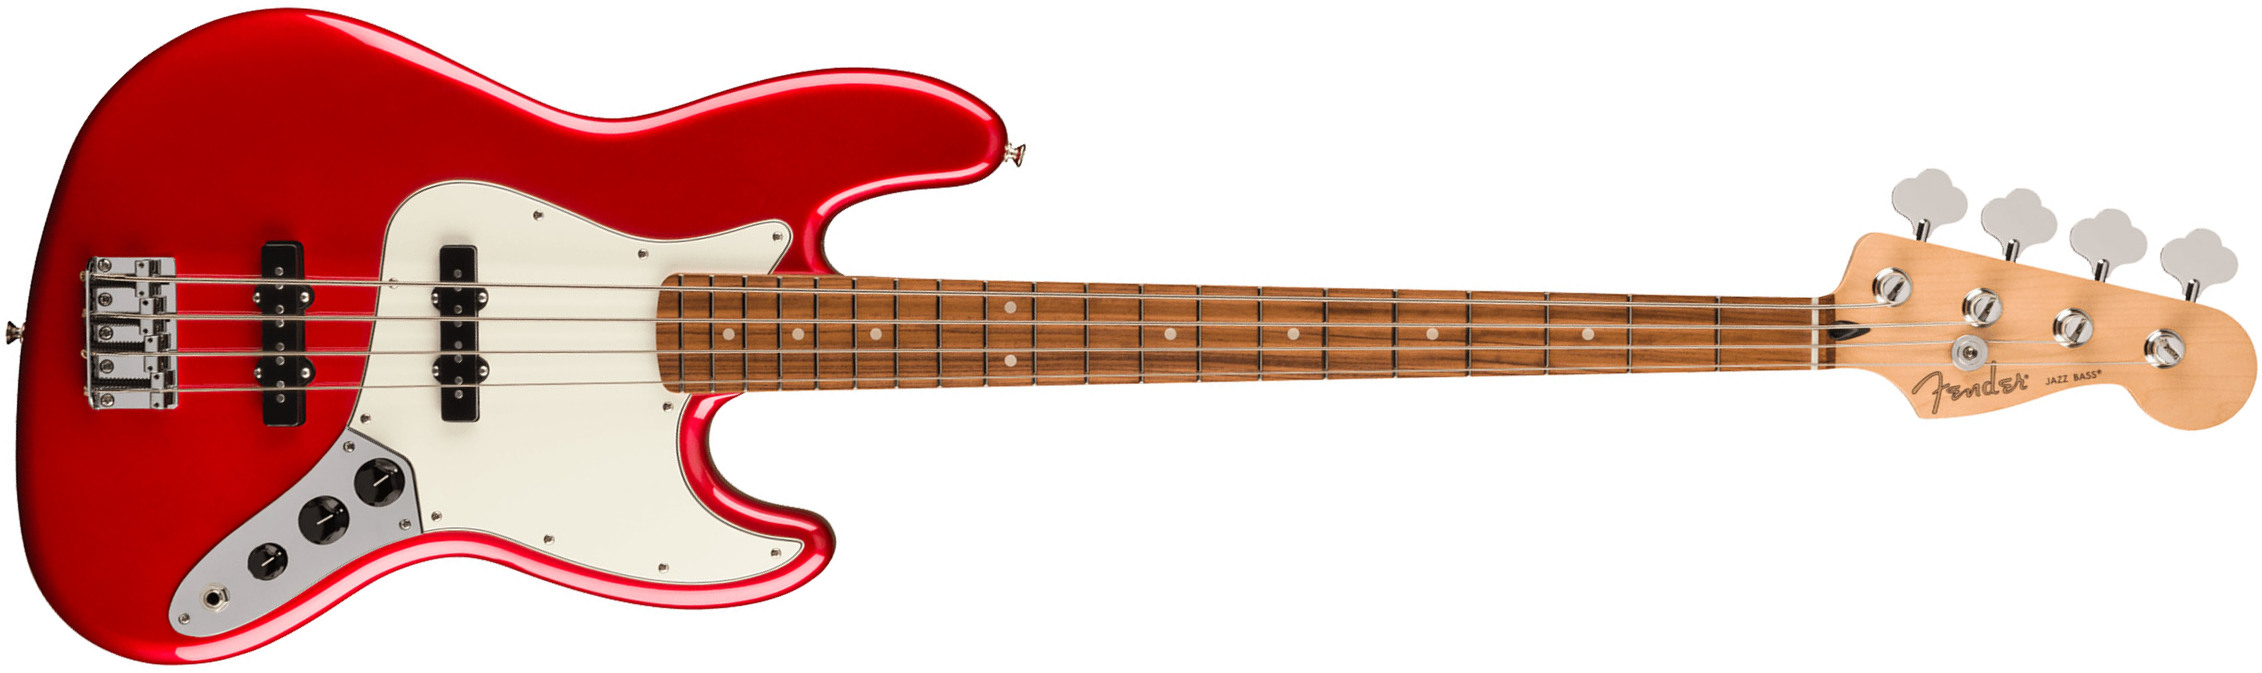 Fender Jazz Bass Player Mex 2023 Pf - Candy Apple Red - Solid body elektrische bas - Main picture